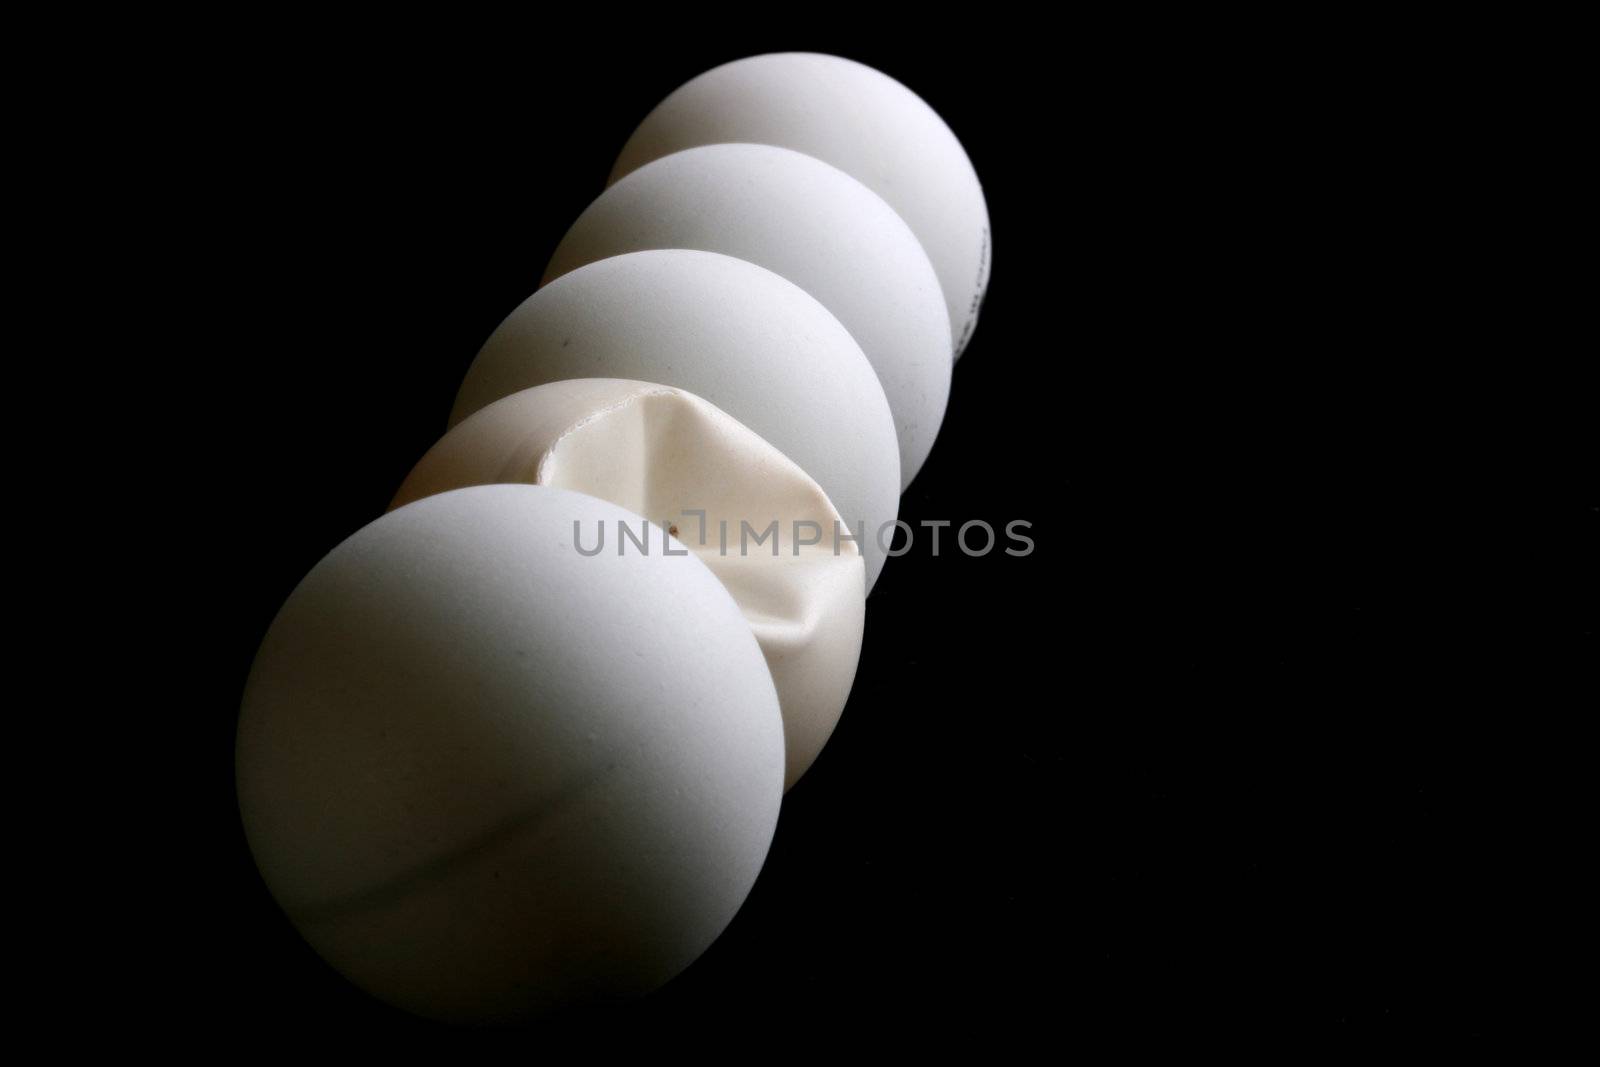 Five balls for game in table tennis on a black background. One ball is rumpled in game.